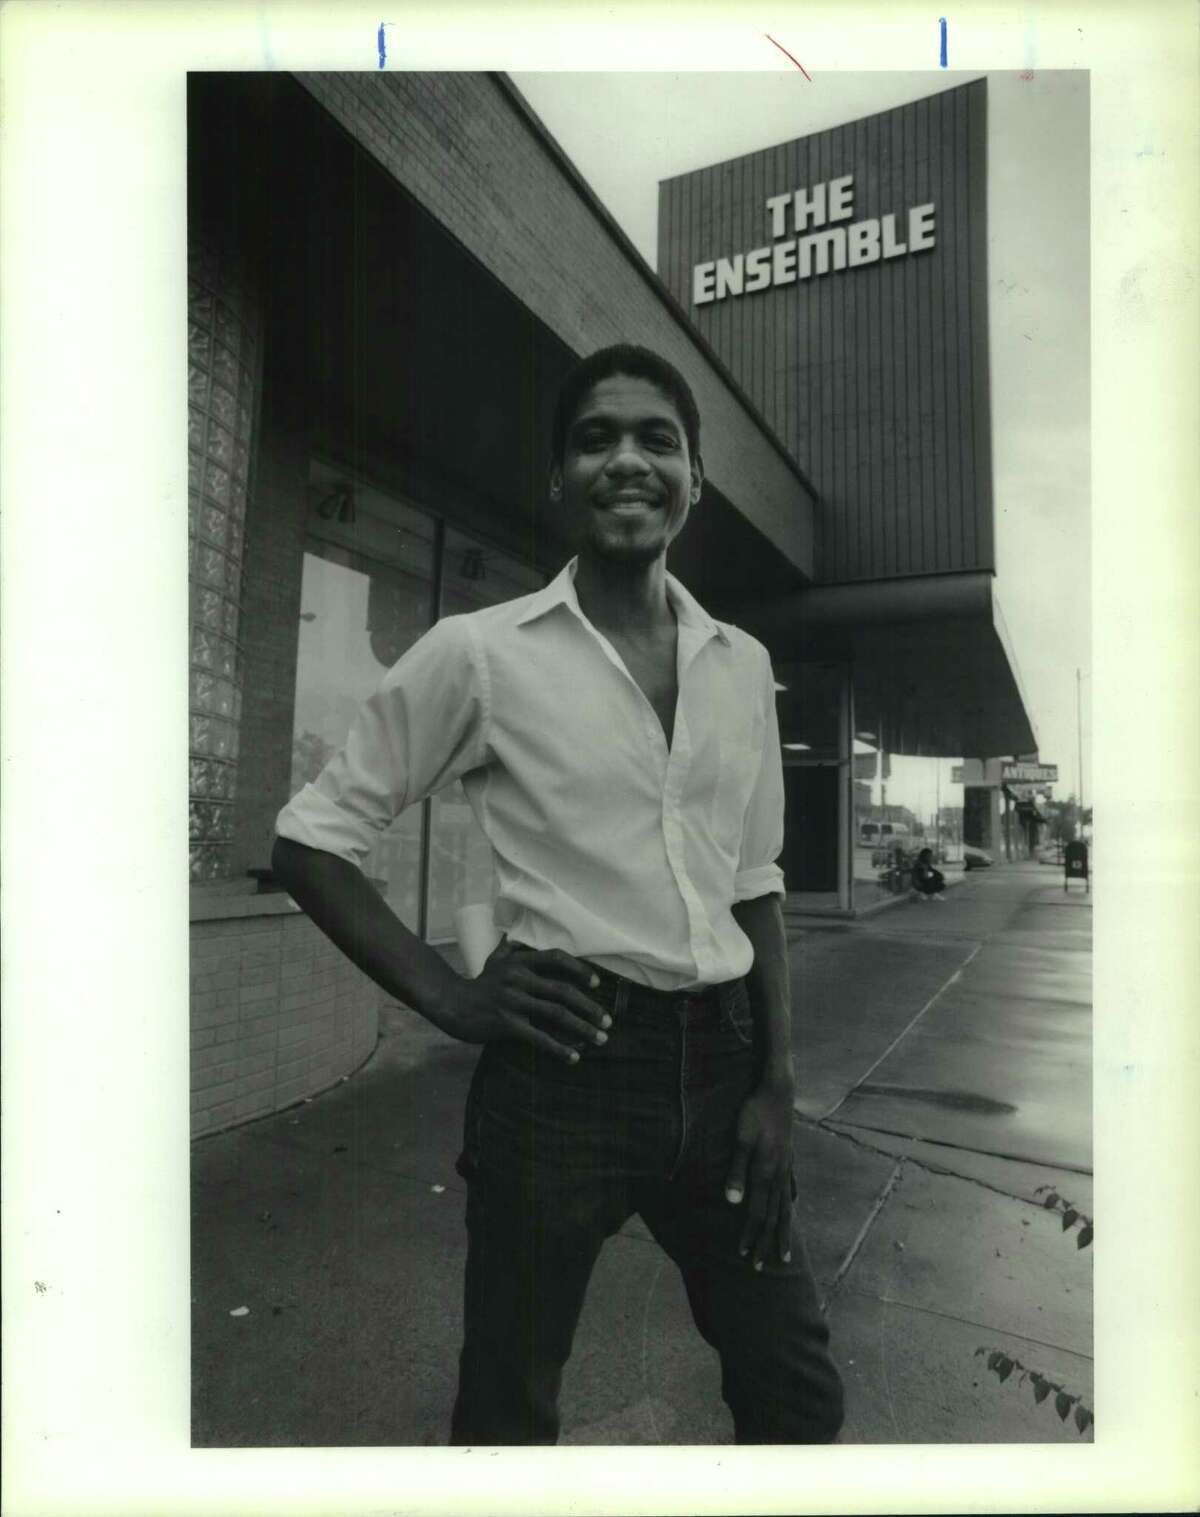 George Hawkins founded The Ensemble in 1975. The 43-year-old artistic director died Saturday. Standing outside The Ensemble Theater in Houston, Texas.